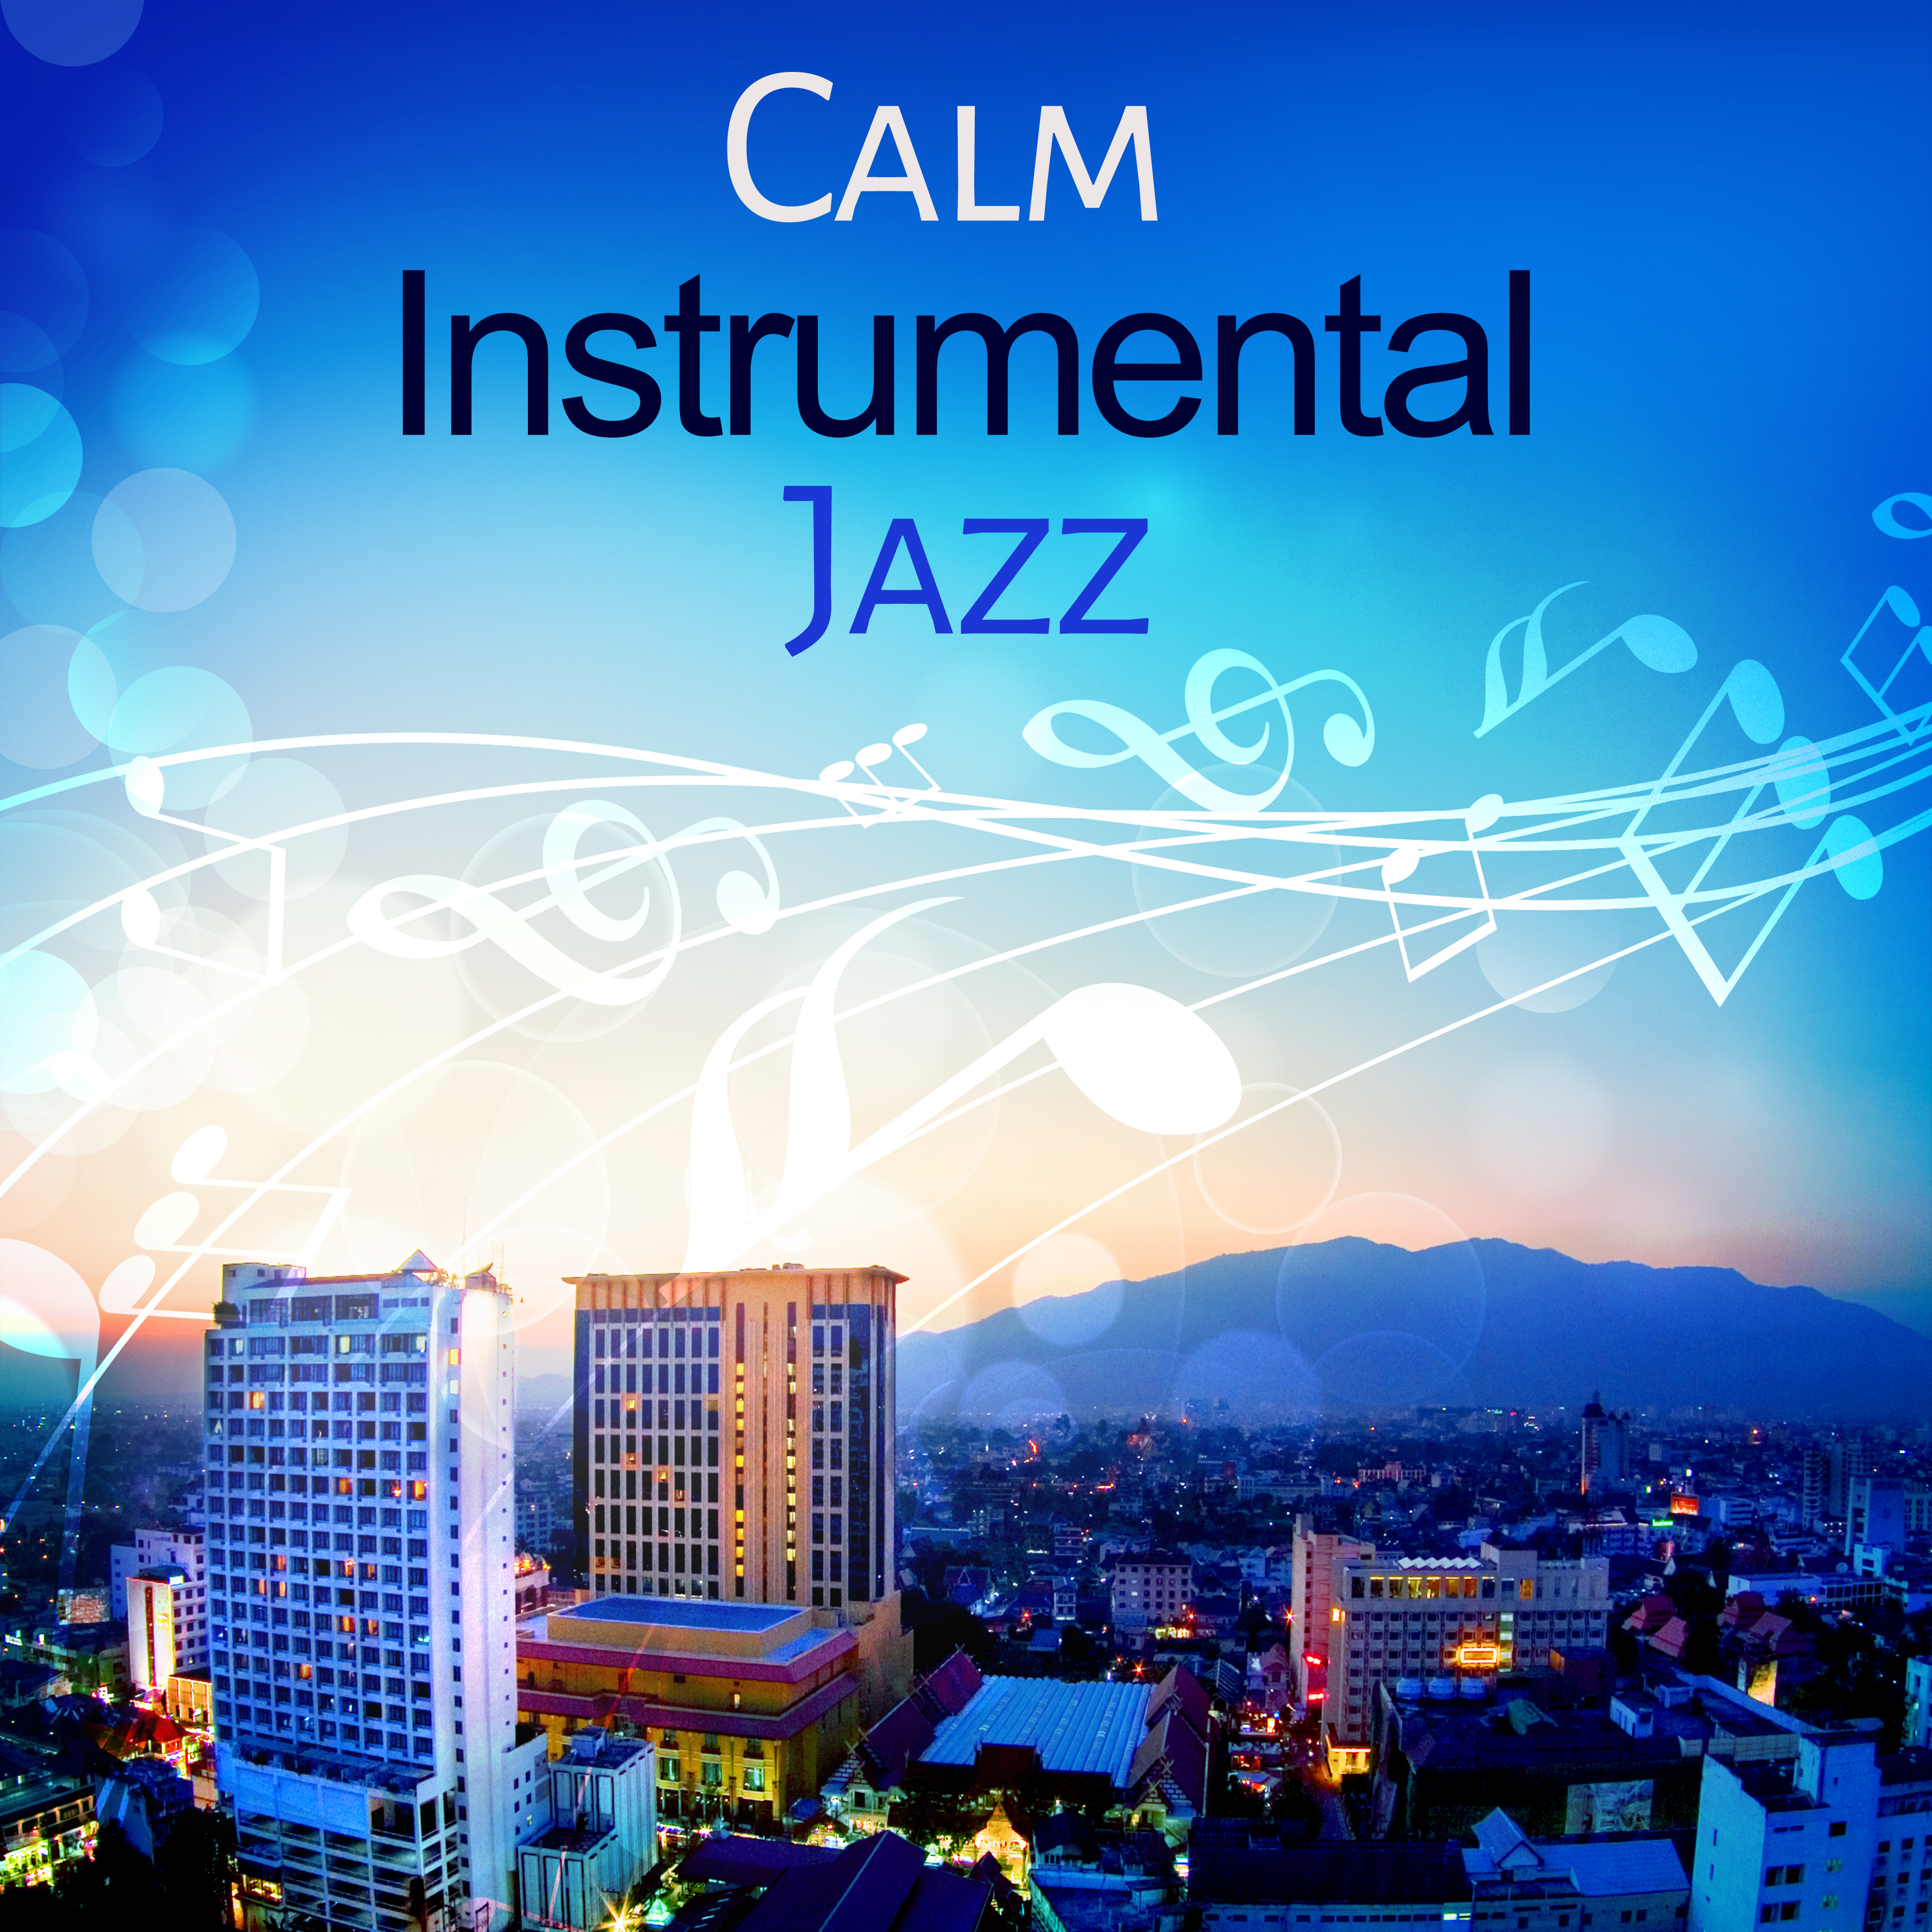 Calm Instrumental Jazz  Relaxing Jazz Music, Instrumental Sounds to Stress Relief, Smooth Sounds to Rest